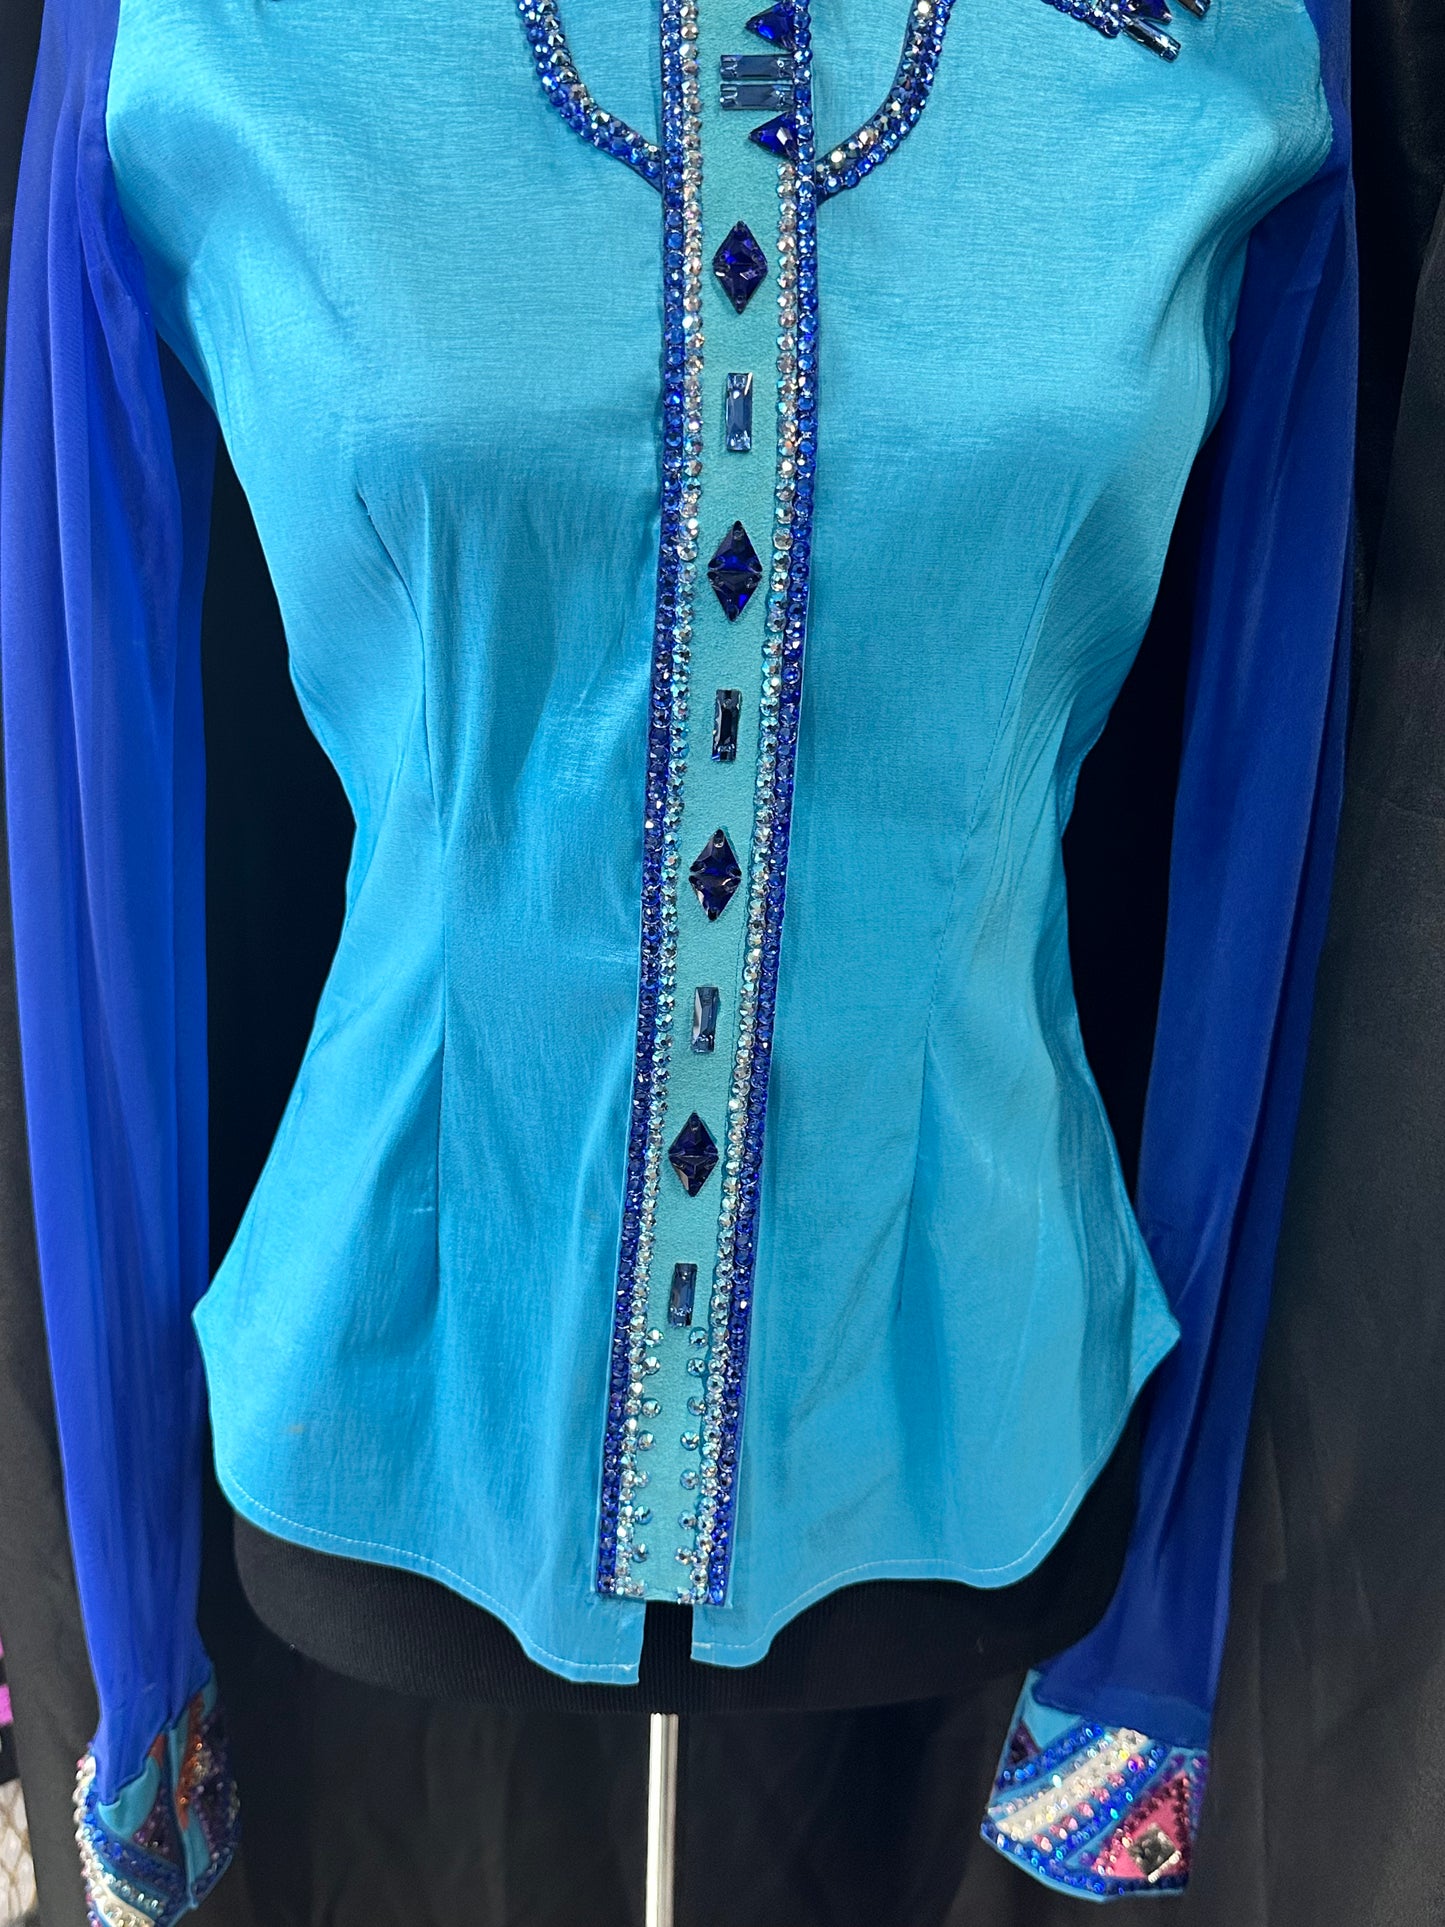 Size small day shirt soft turquoise stretch taffeta with sheer sleeves. Western yokes.